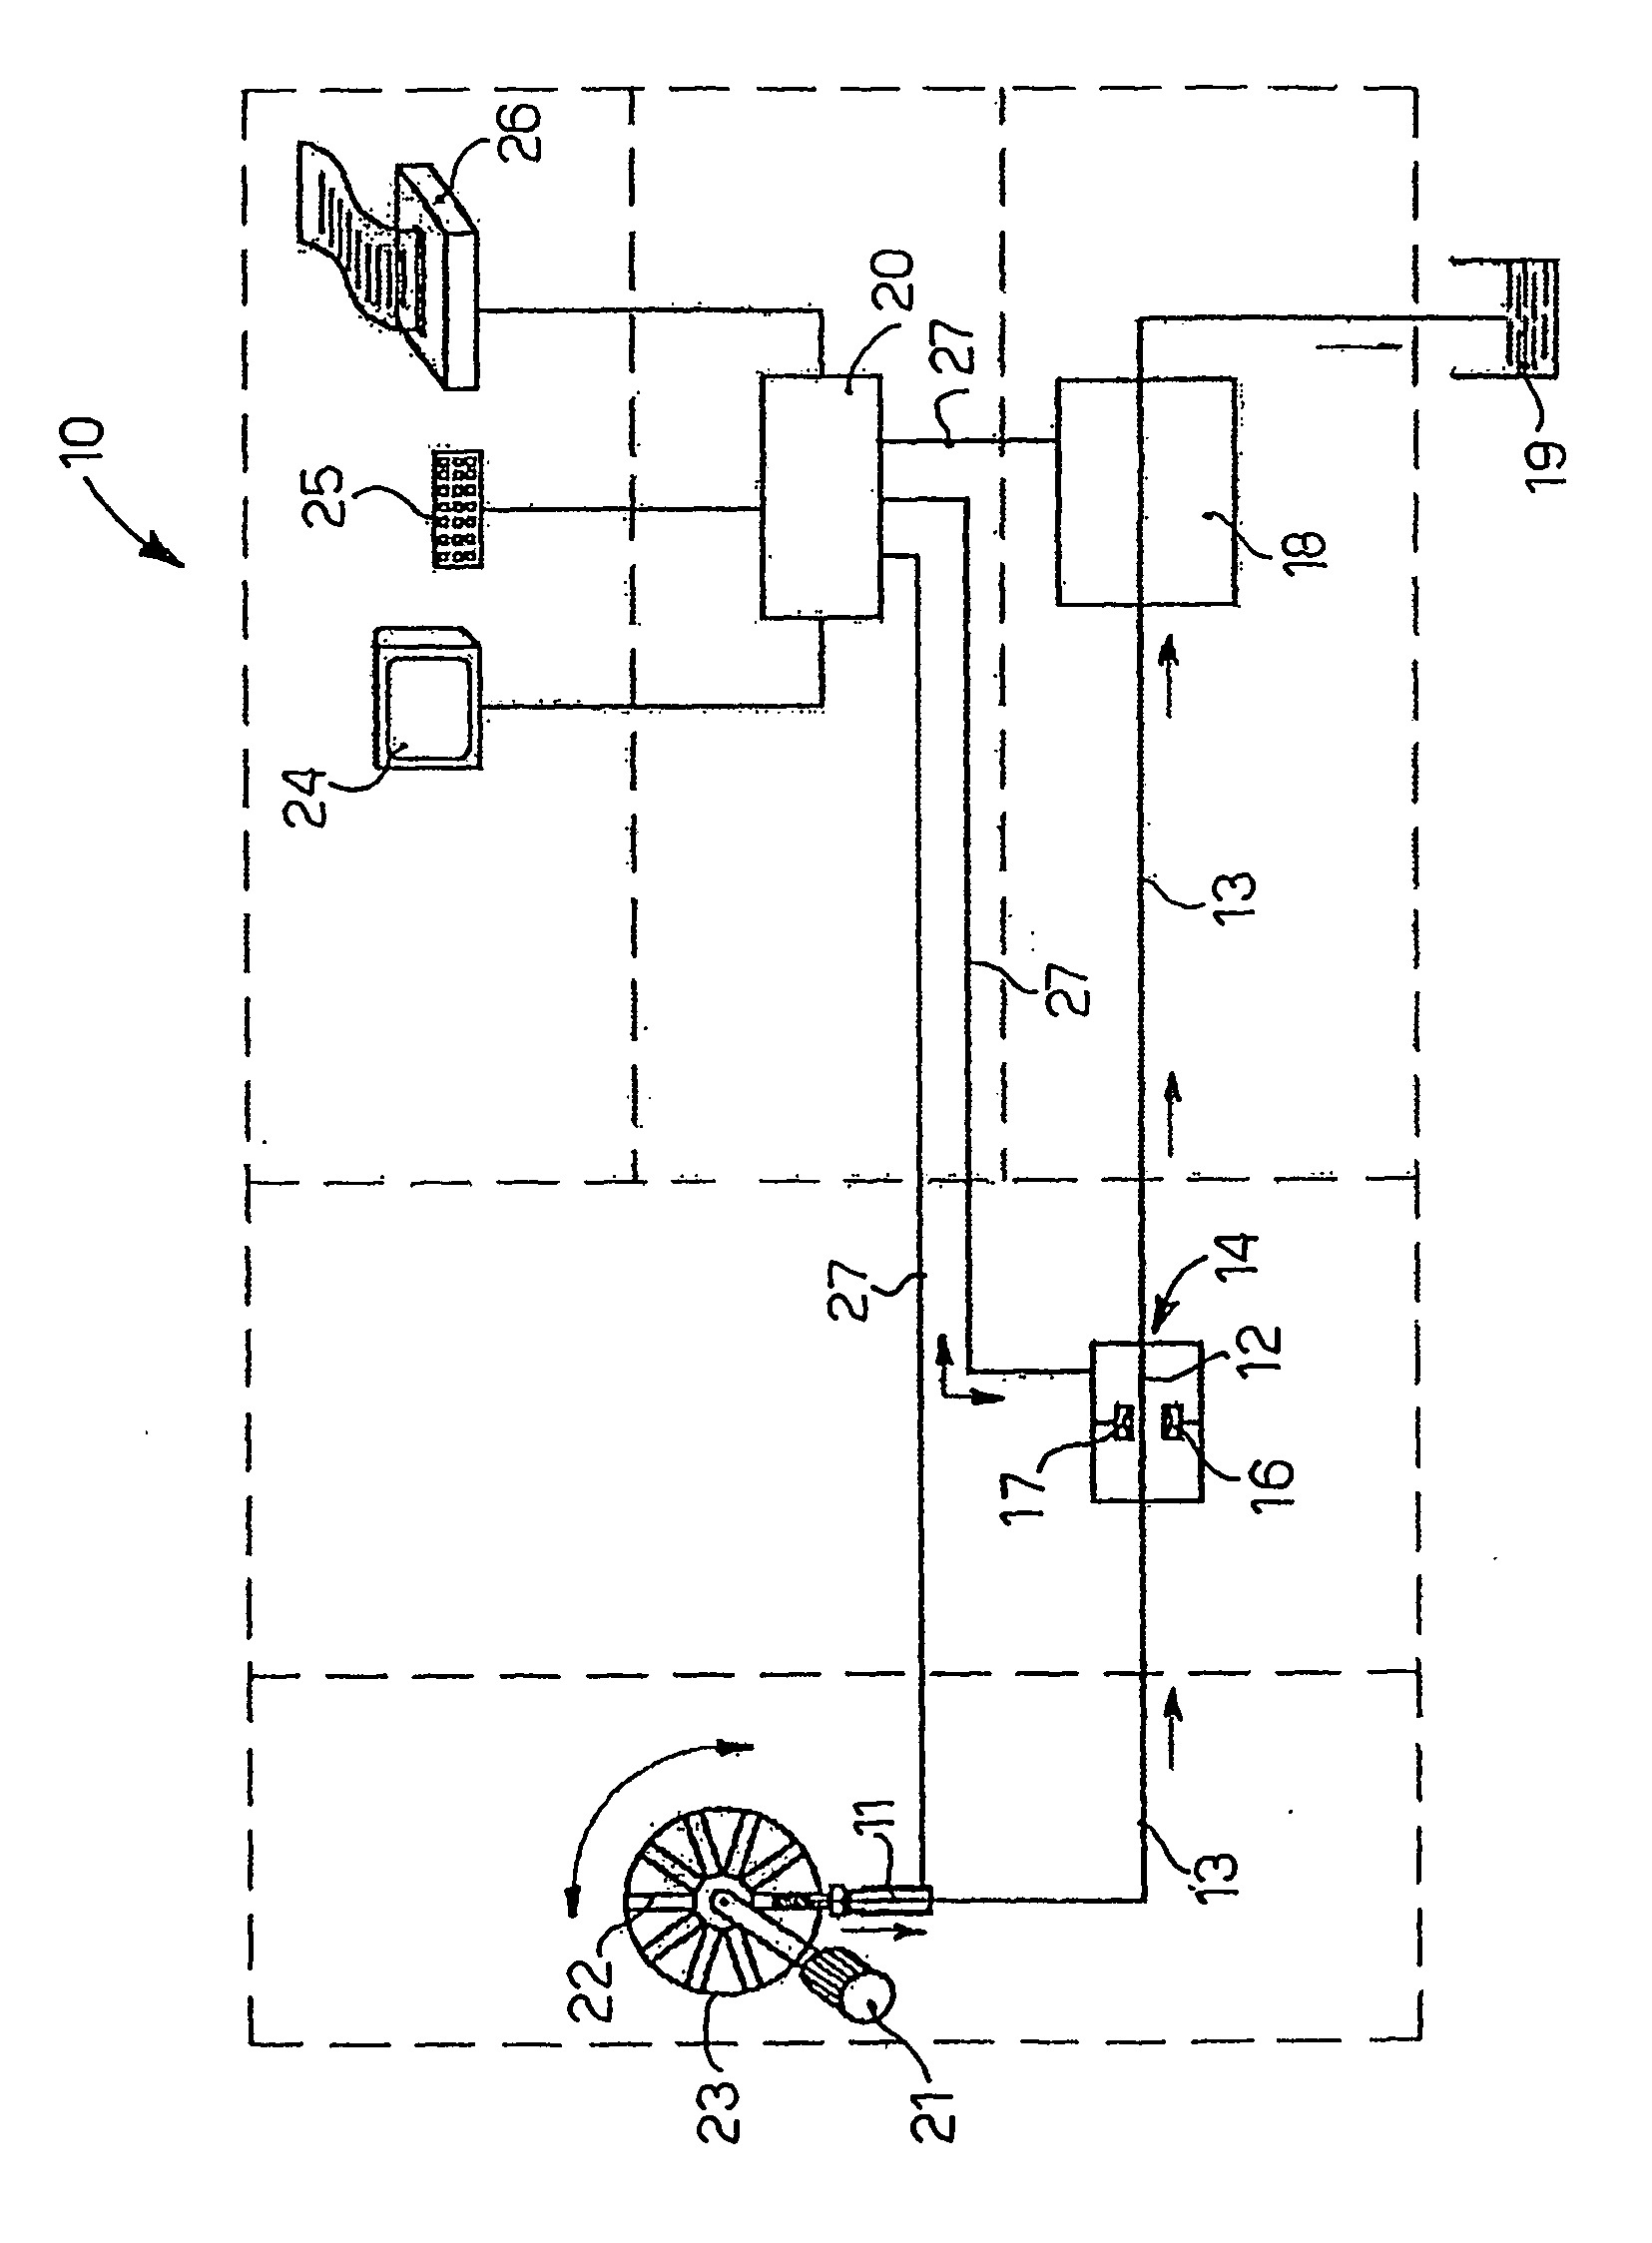 Intergrated apparatus for hematological analysis and related method